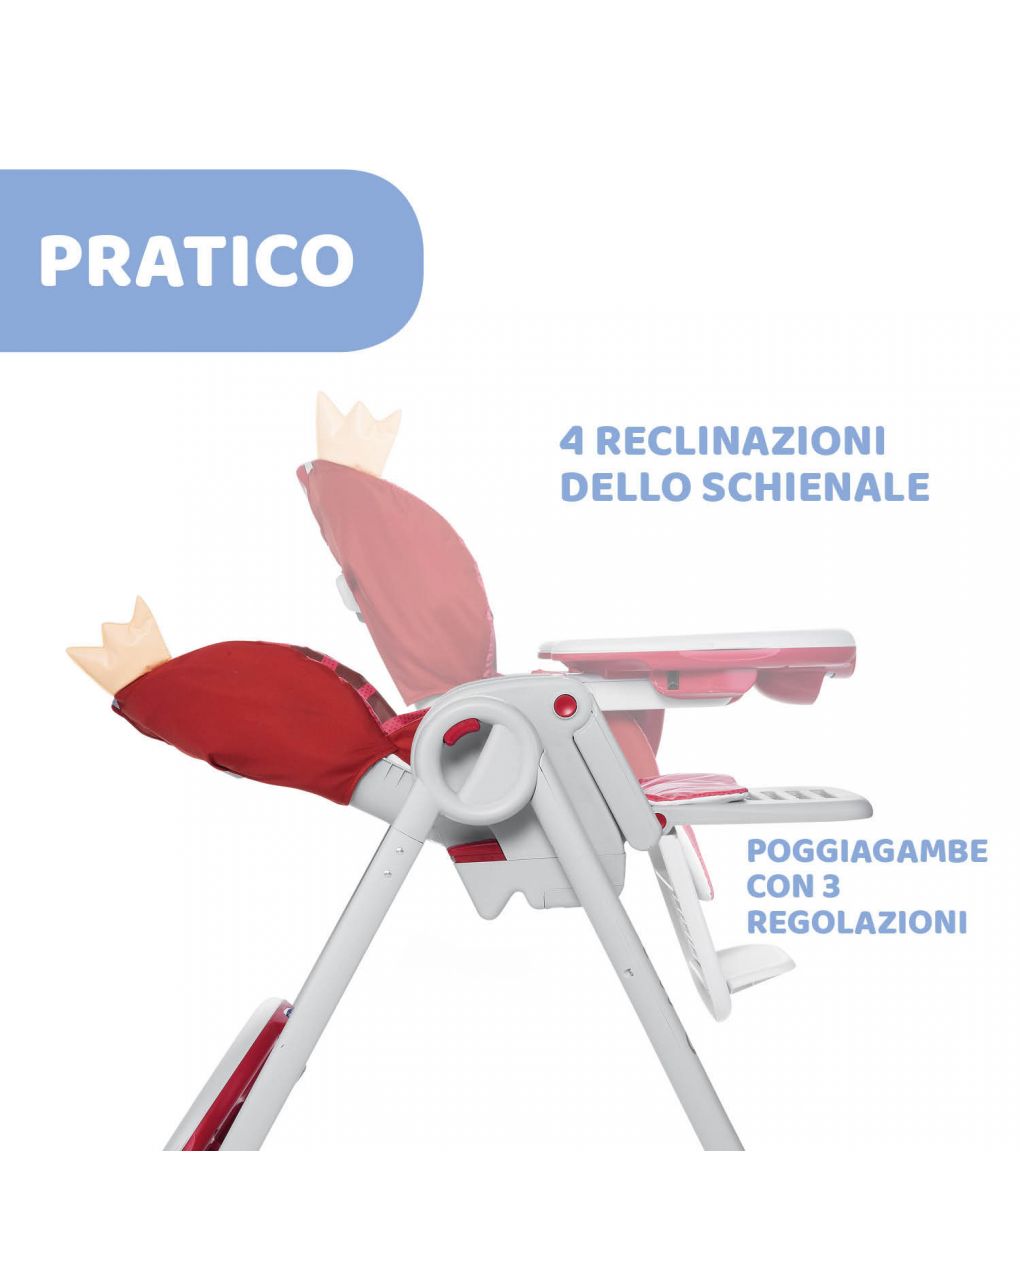 Trona polly 2 start lion red -4r - Chicco